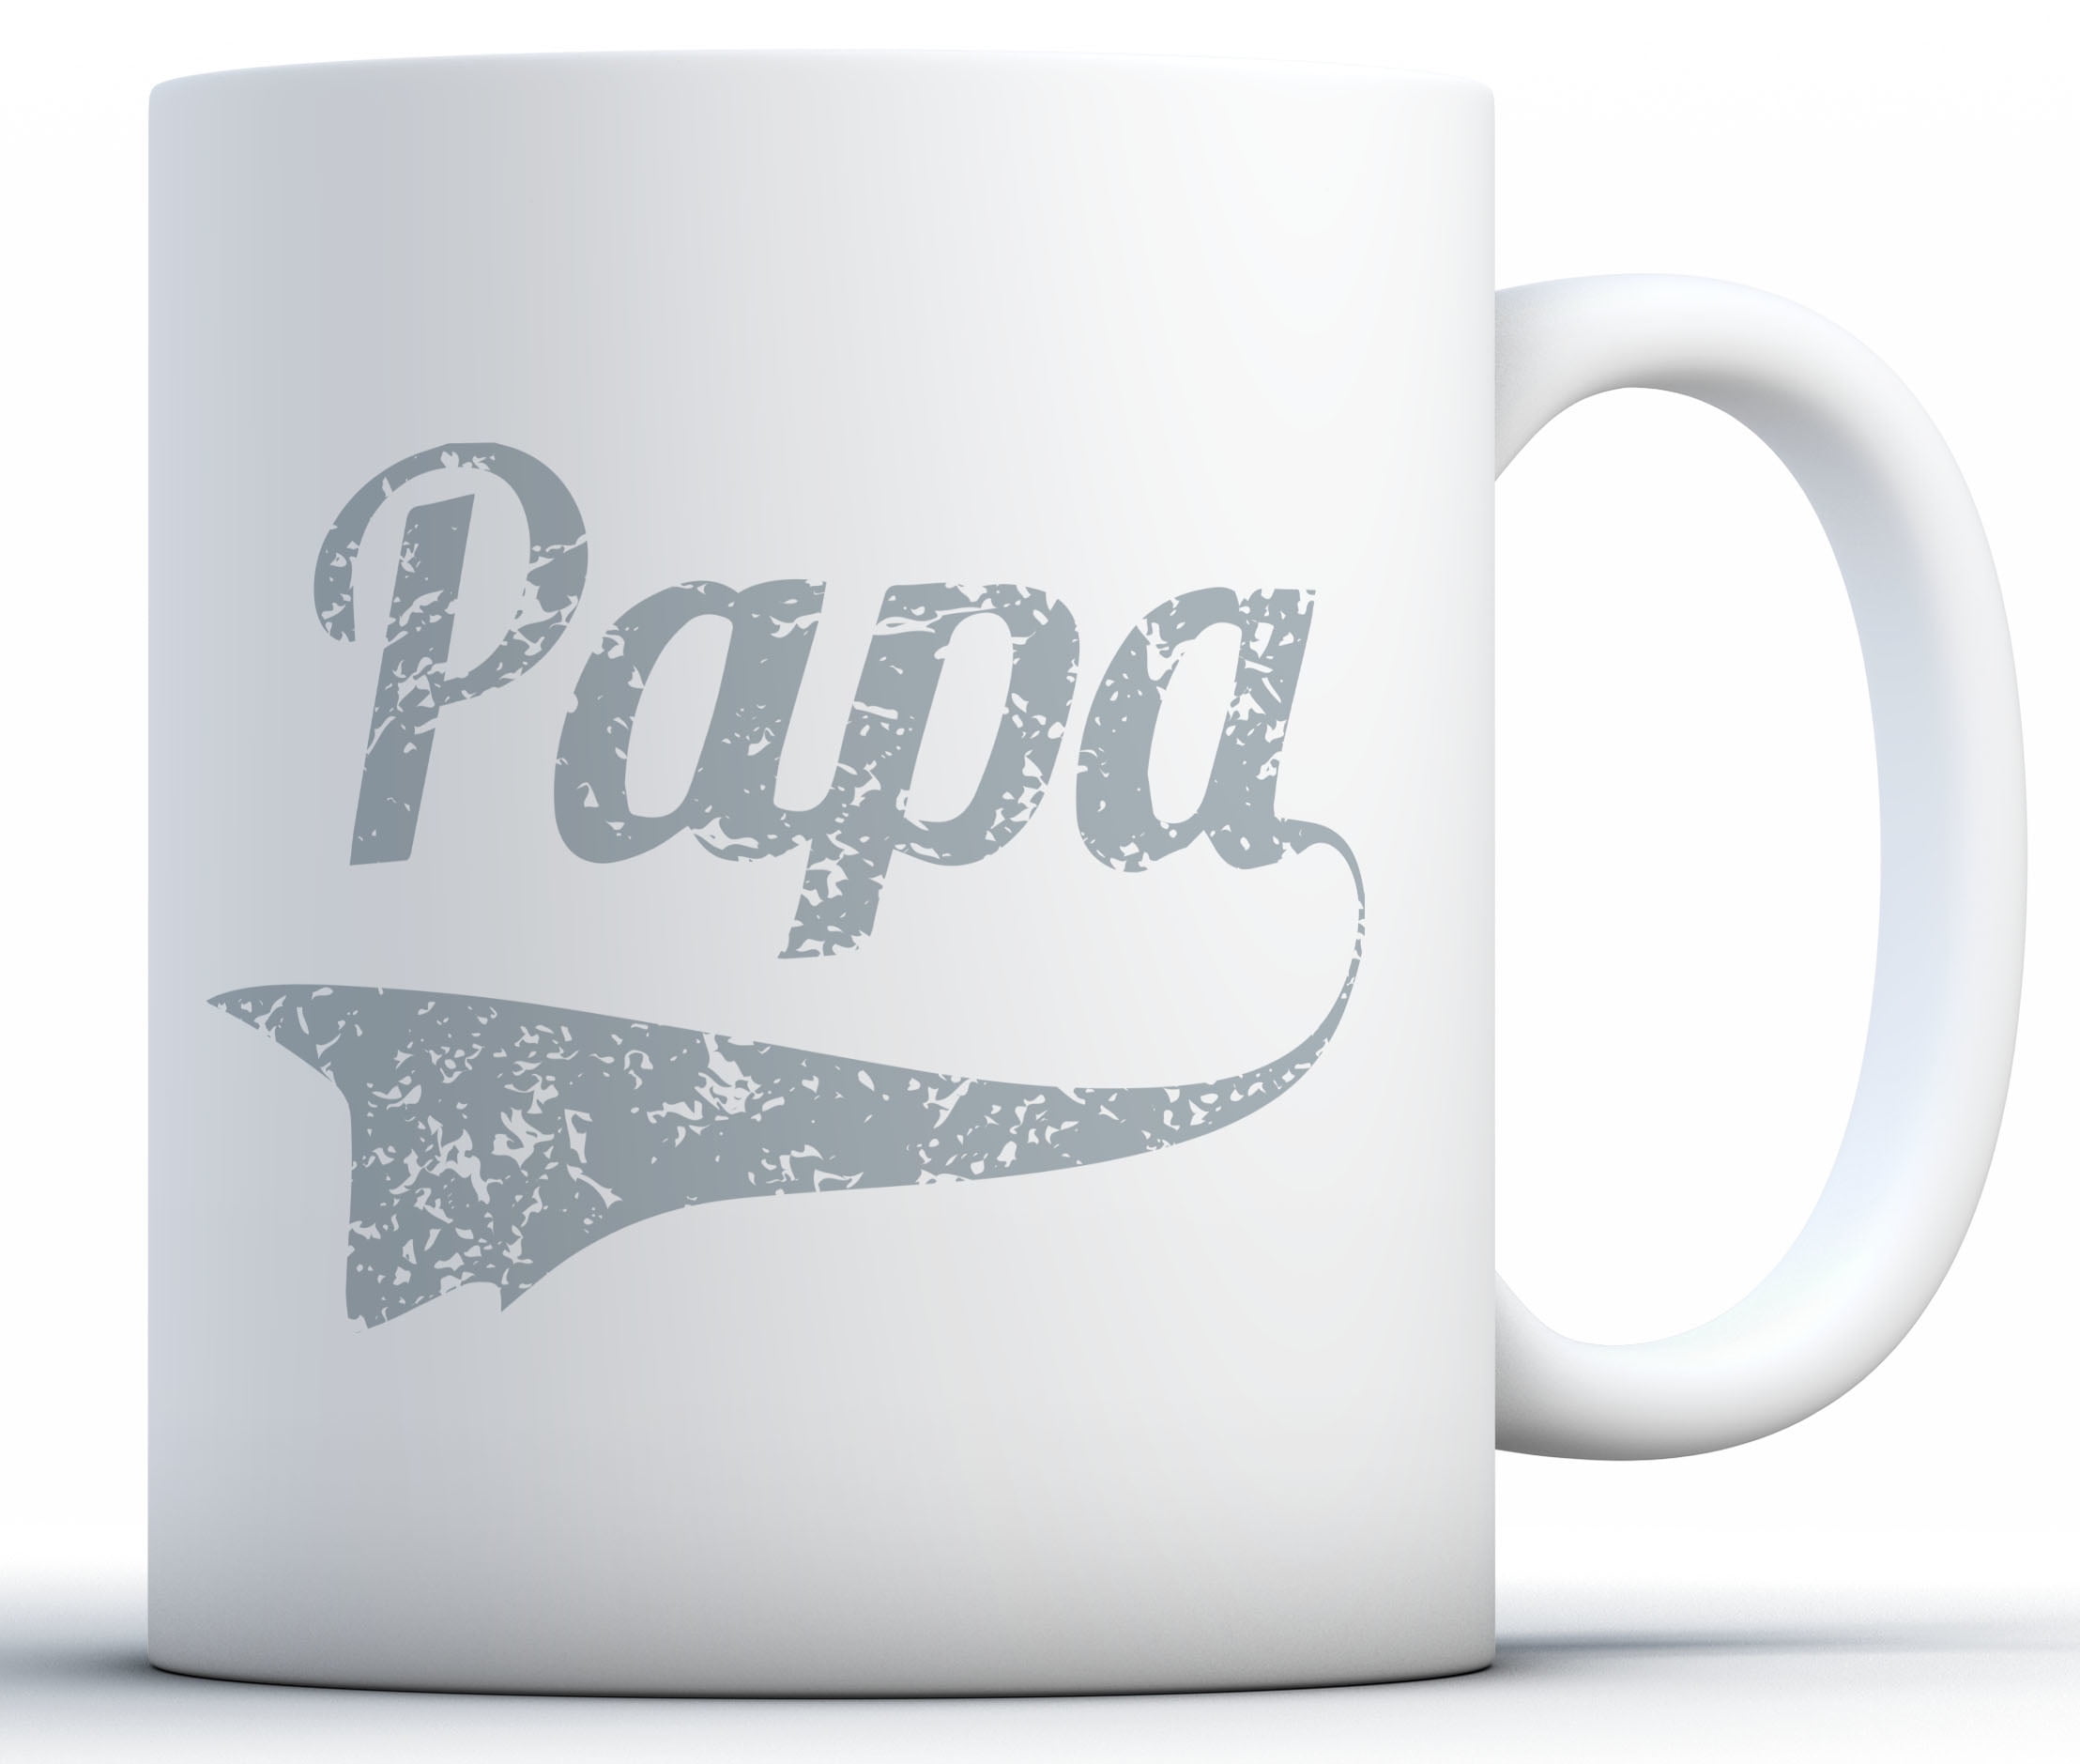 Unique Design Coffee Dad Mugs for Father’s Day JJA Dad Coffee Mug with Coasters Set Best Dad Ever Birthday Gift Present from Daughter Son